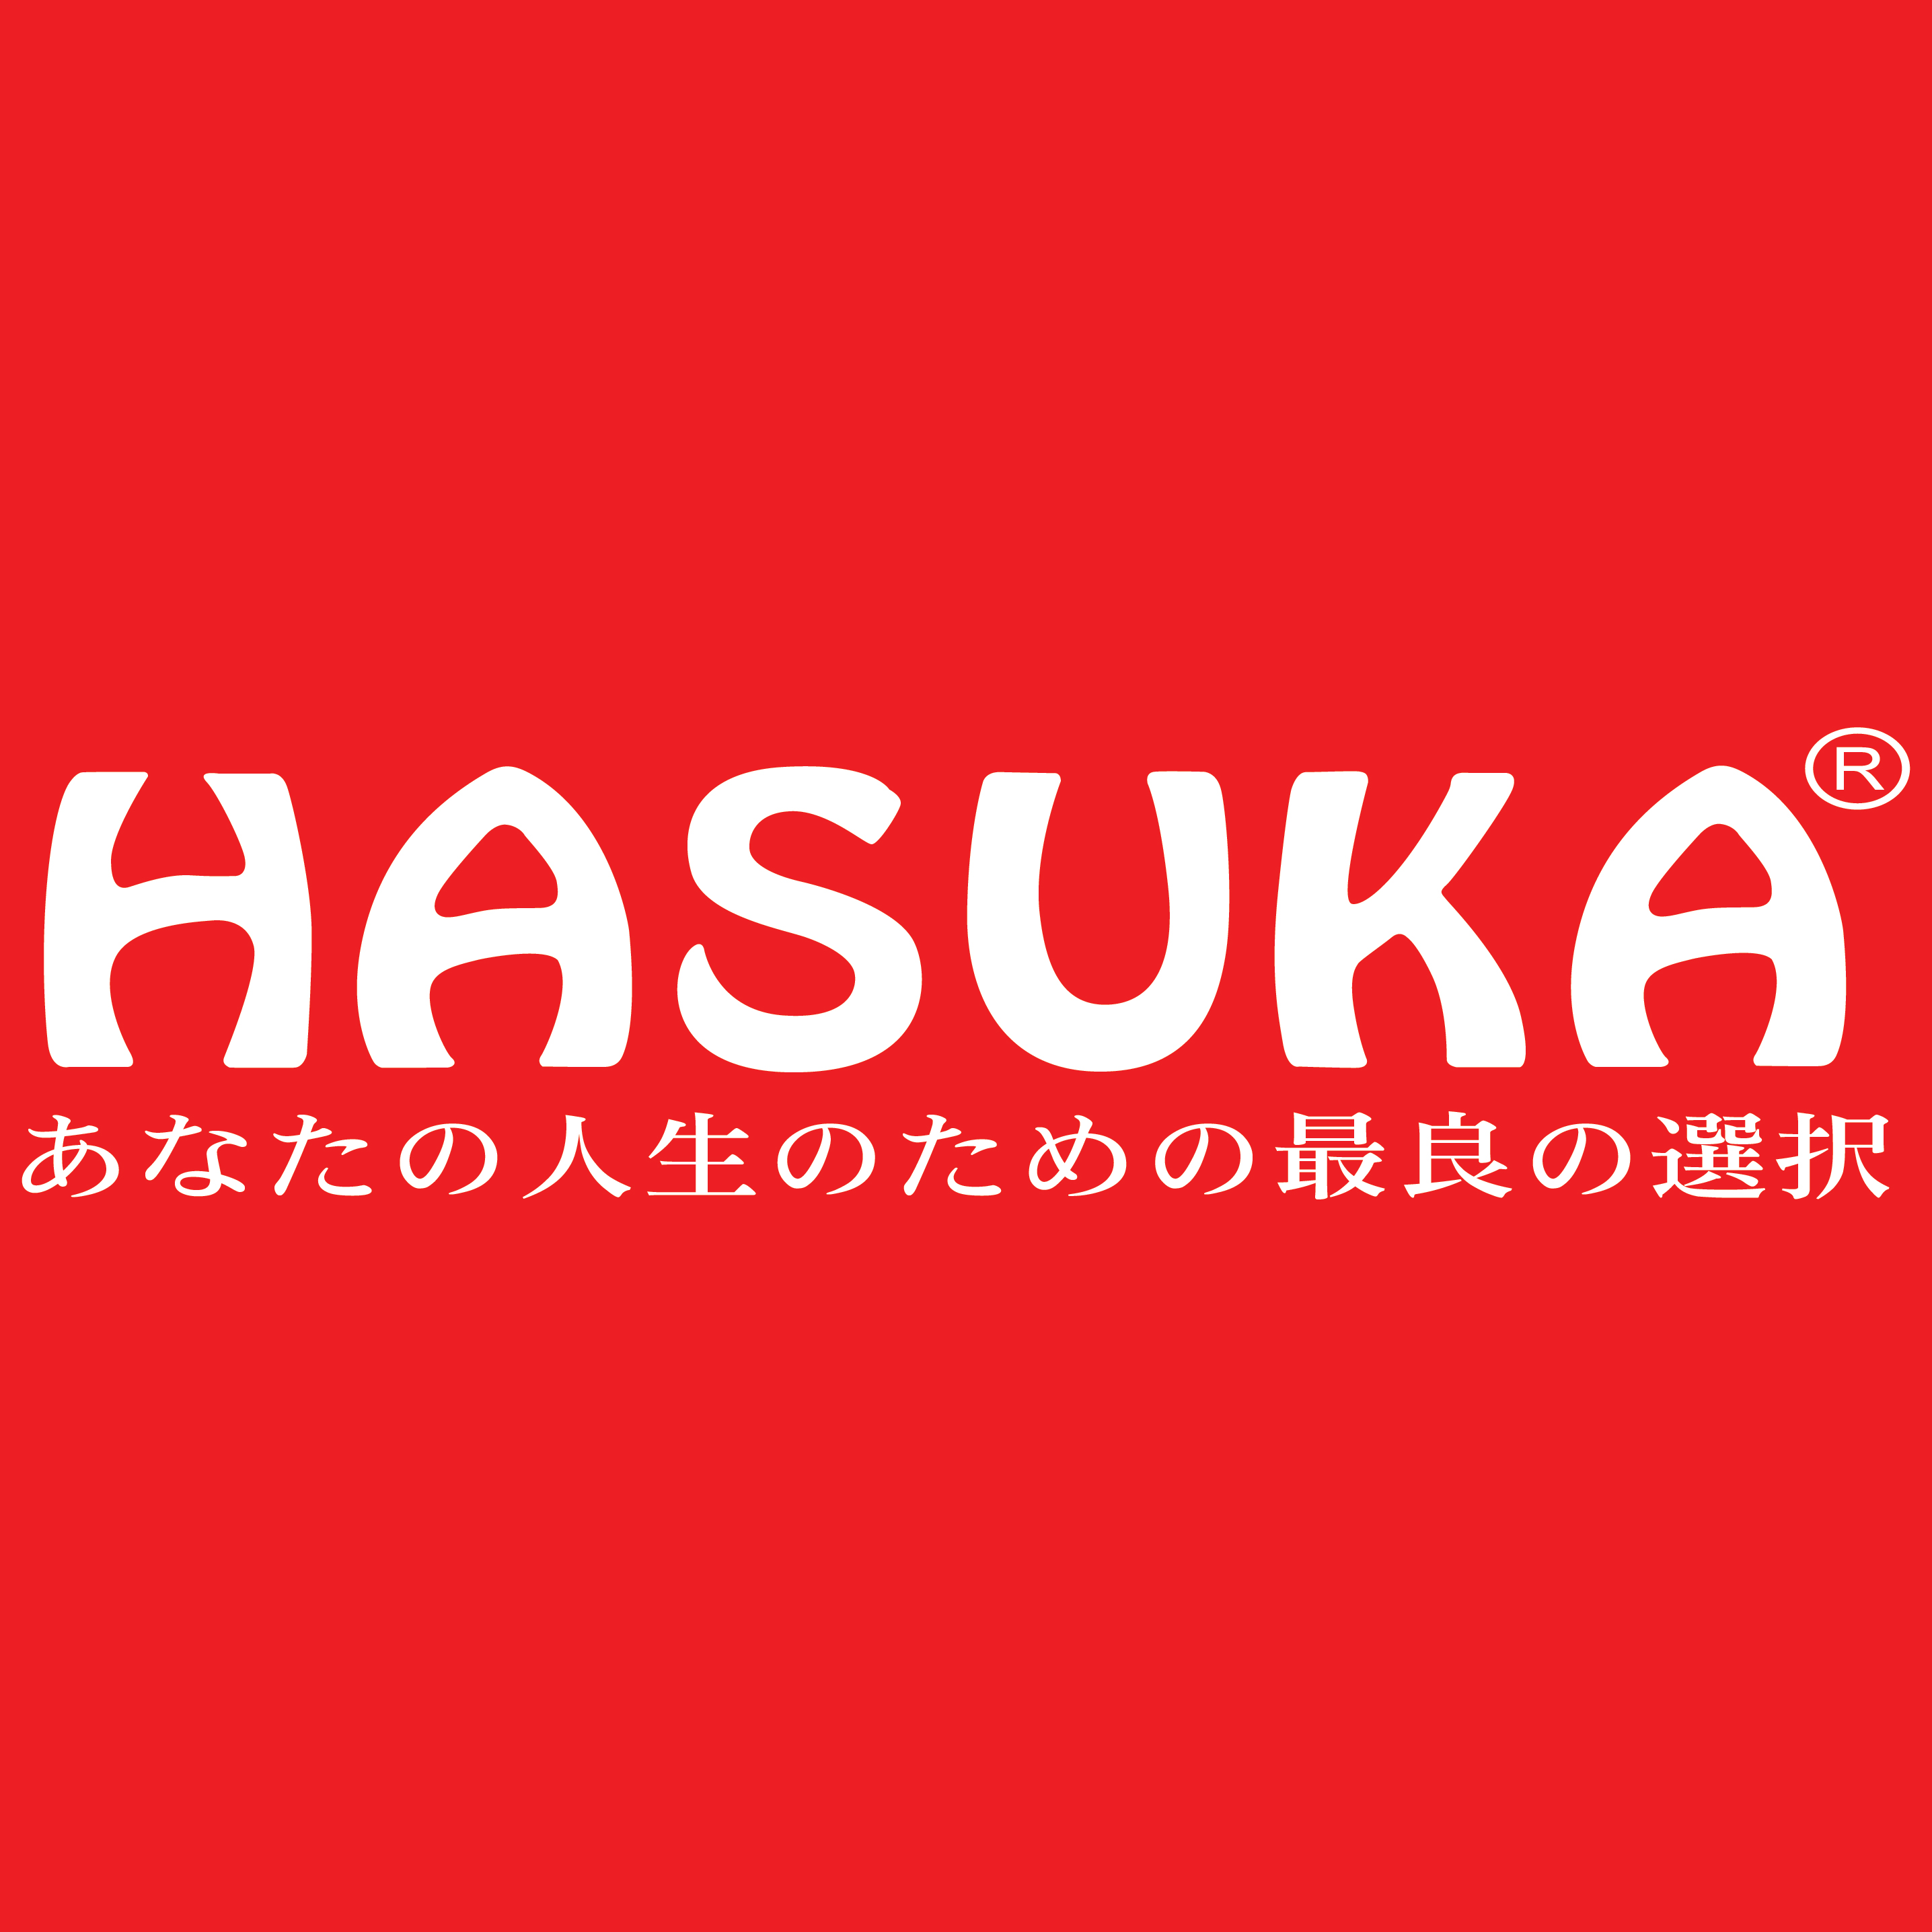 Hasuka Official Store